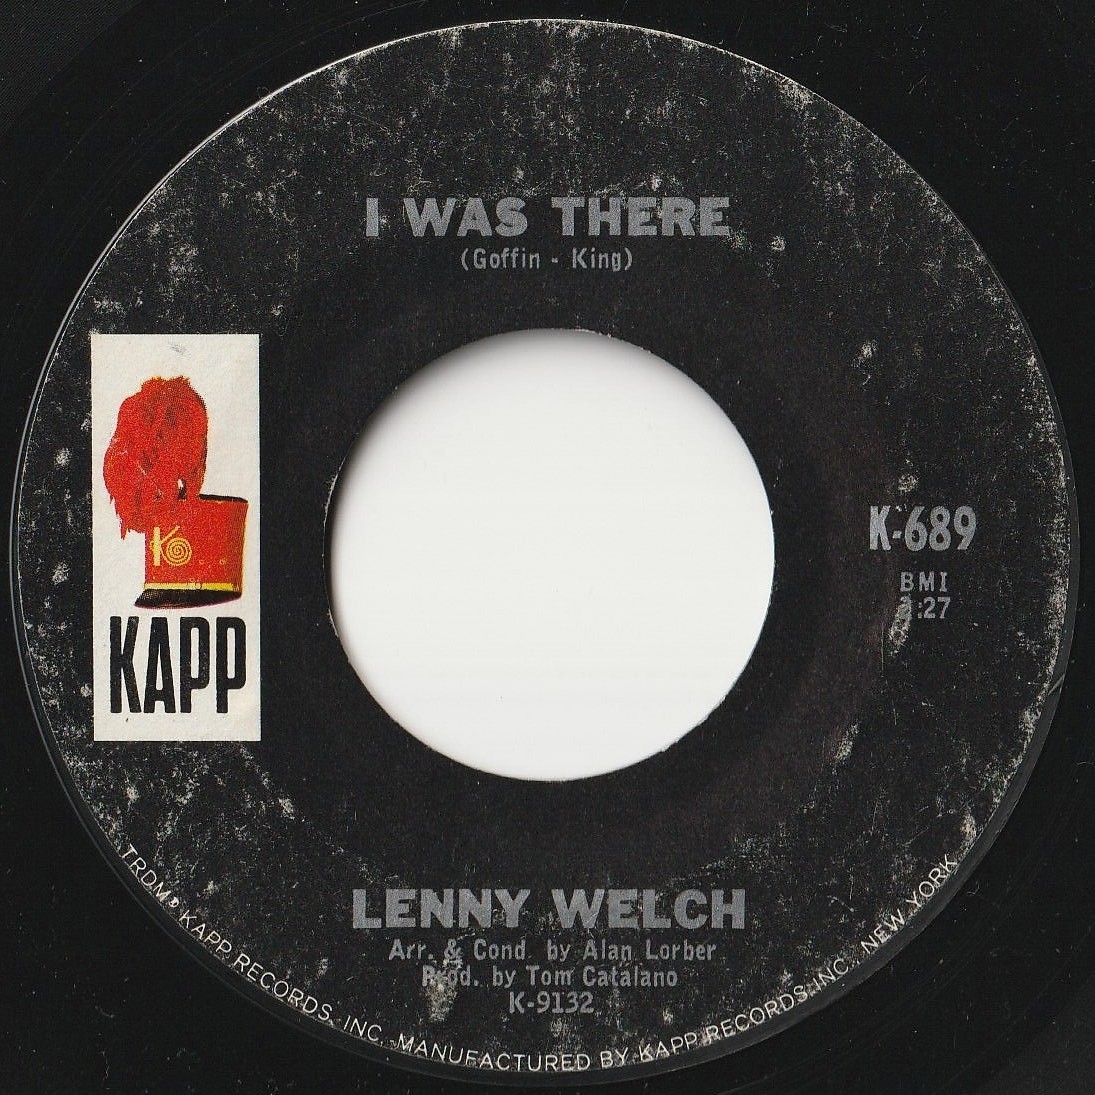 Lenny Welch Two Different Worlds / I Was There Kapp US K-689 202563 SOUL ソウル レコード 7インチ 45_画像2